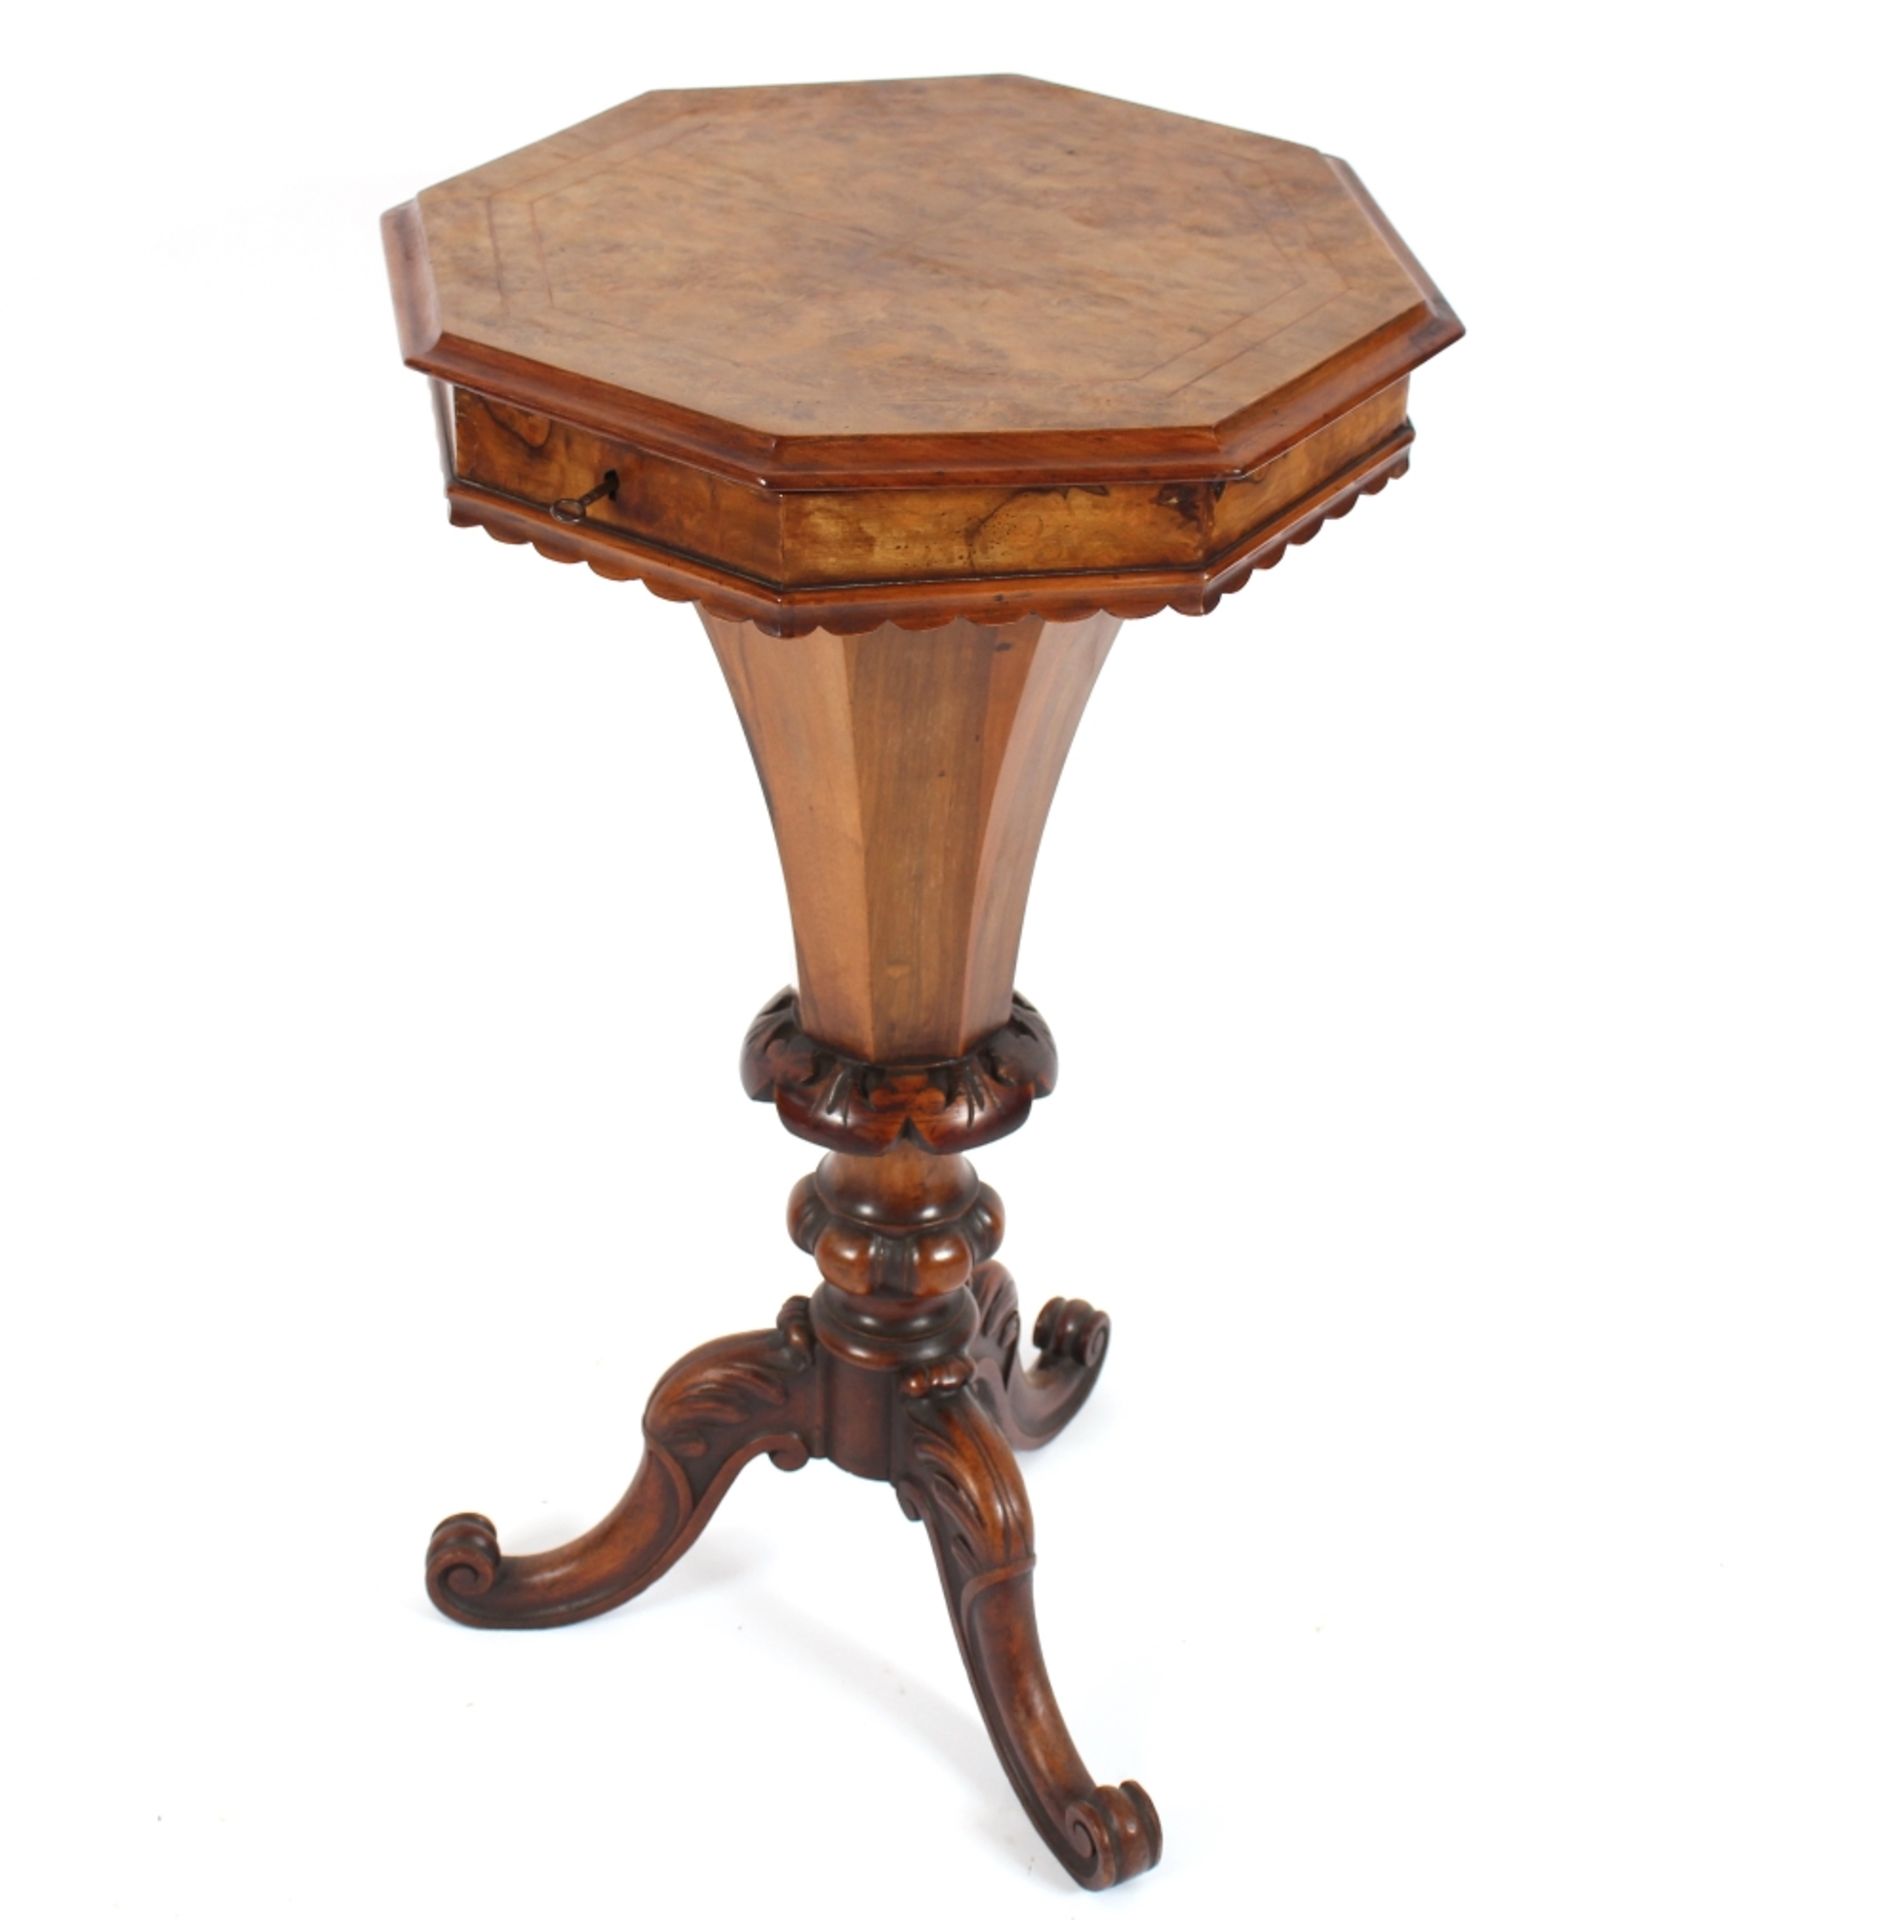 A Victorian walnut trumpet shaped work table, the octagonal lid opening to reveal a partitioned